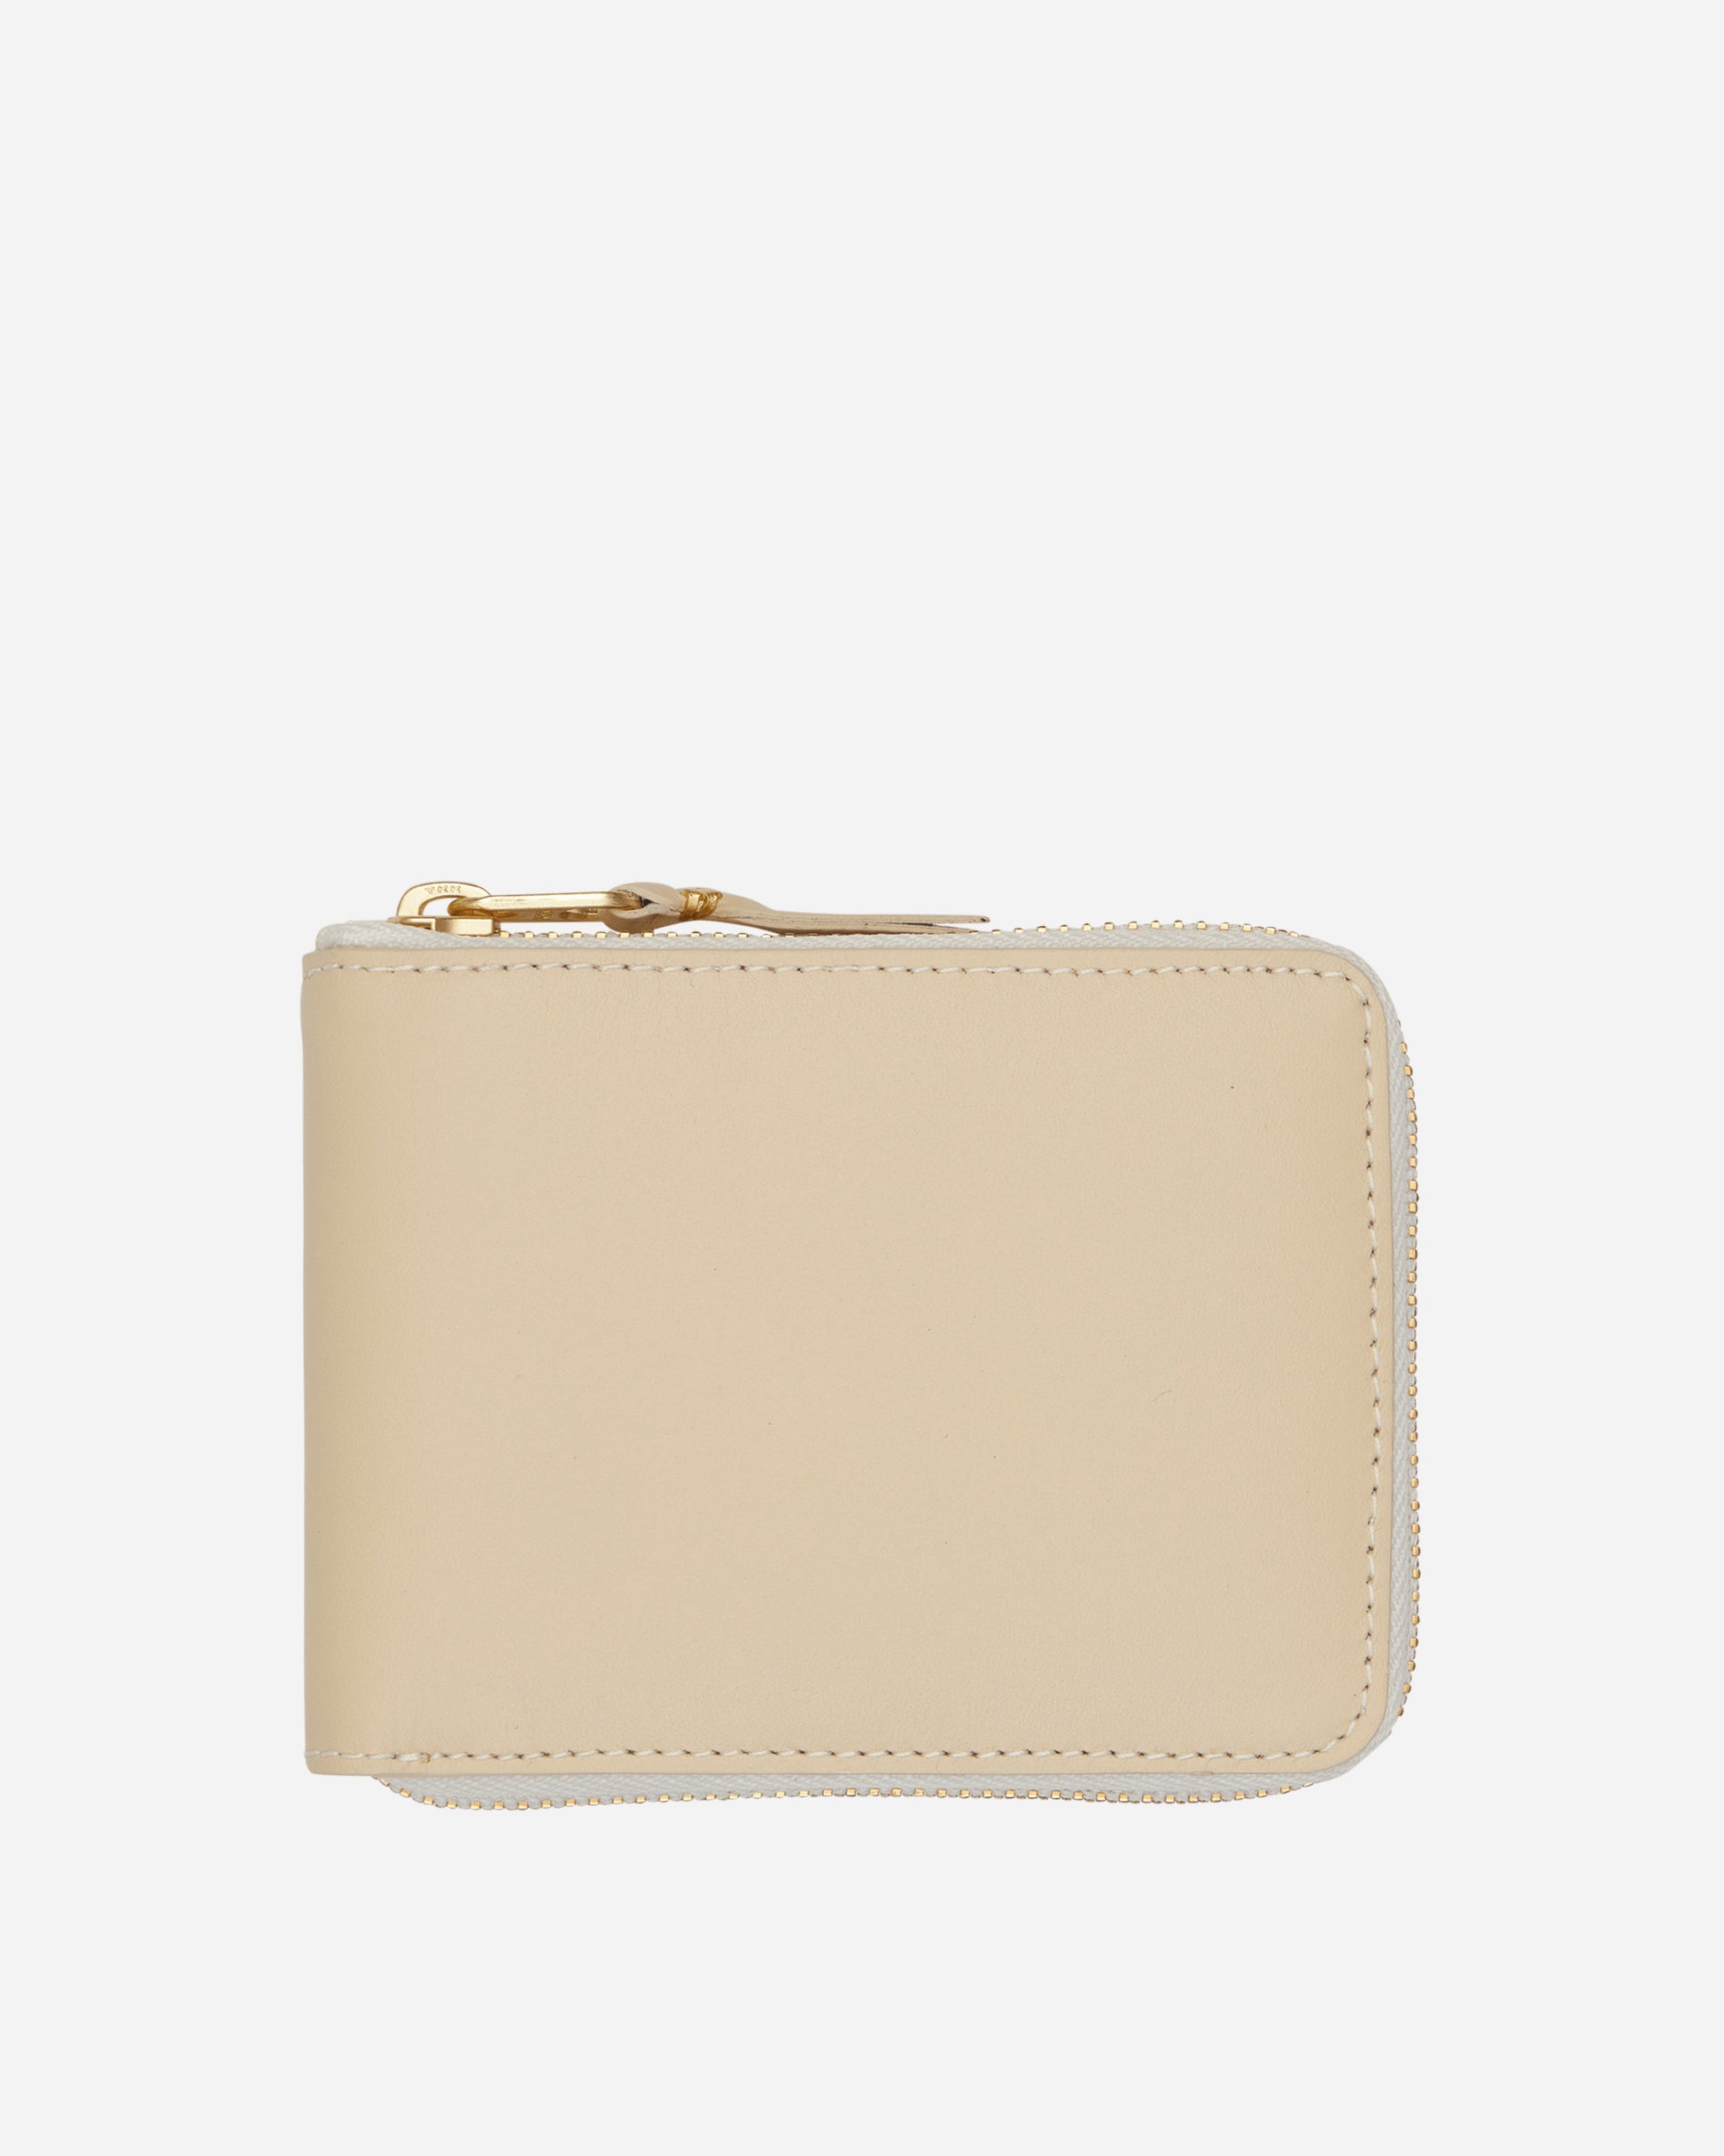 Comme Des Garçons Wallet Classic Leather Wallet Off White Wallets and Cardholders Wallets SA7100 3